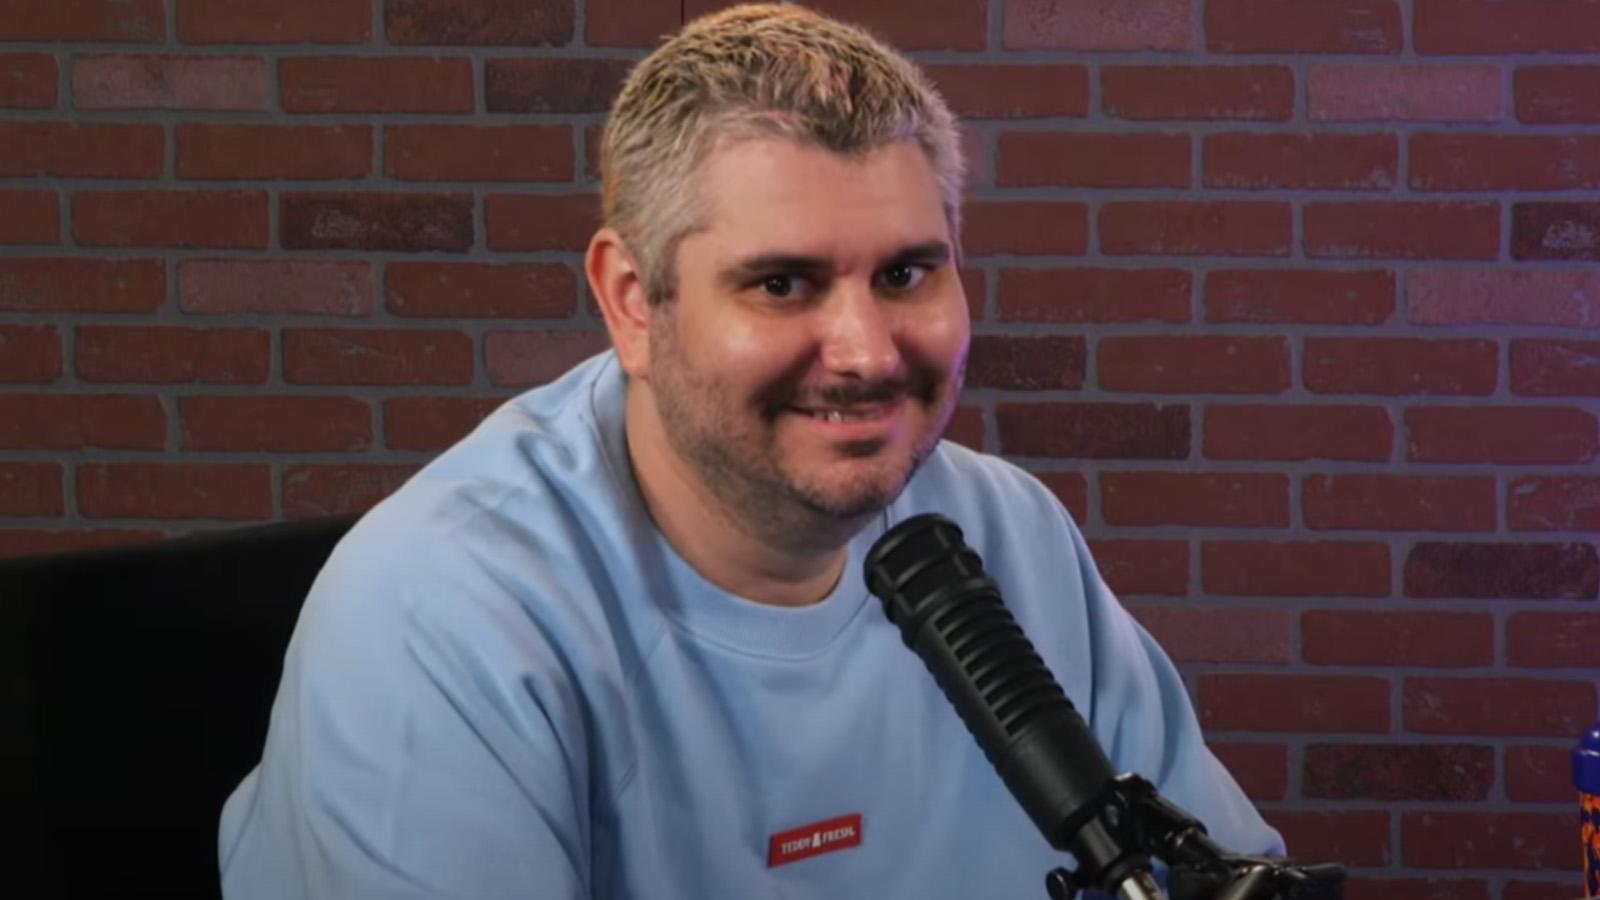 ethan klein looking into the camera